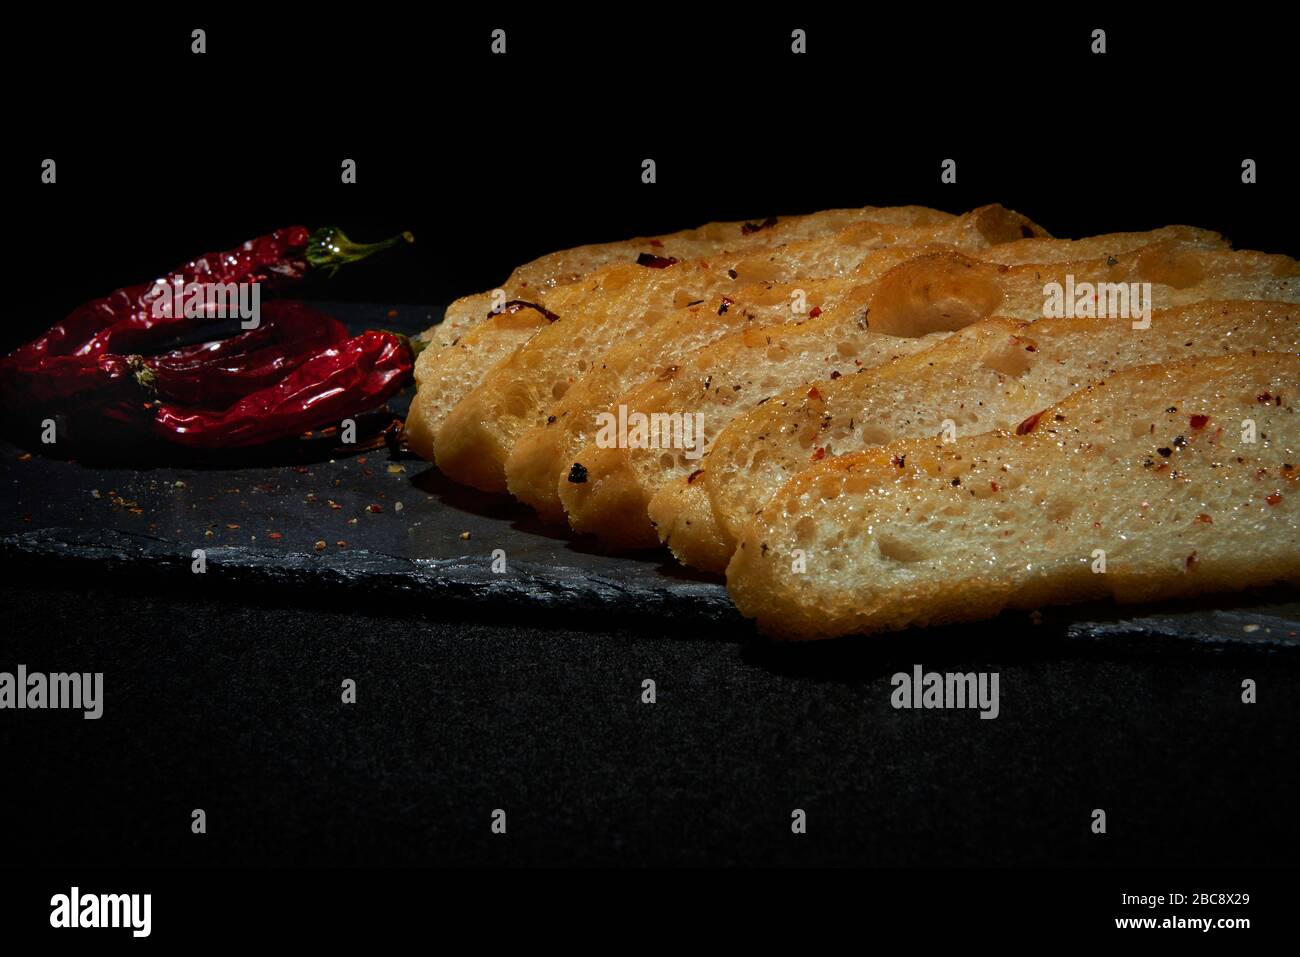 Display of homemade Italian style Focaccia loaf with dried chillies.  Sliced bread displayed on modern black slate with red chillies and flakes Stock Photo